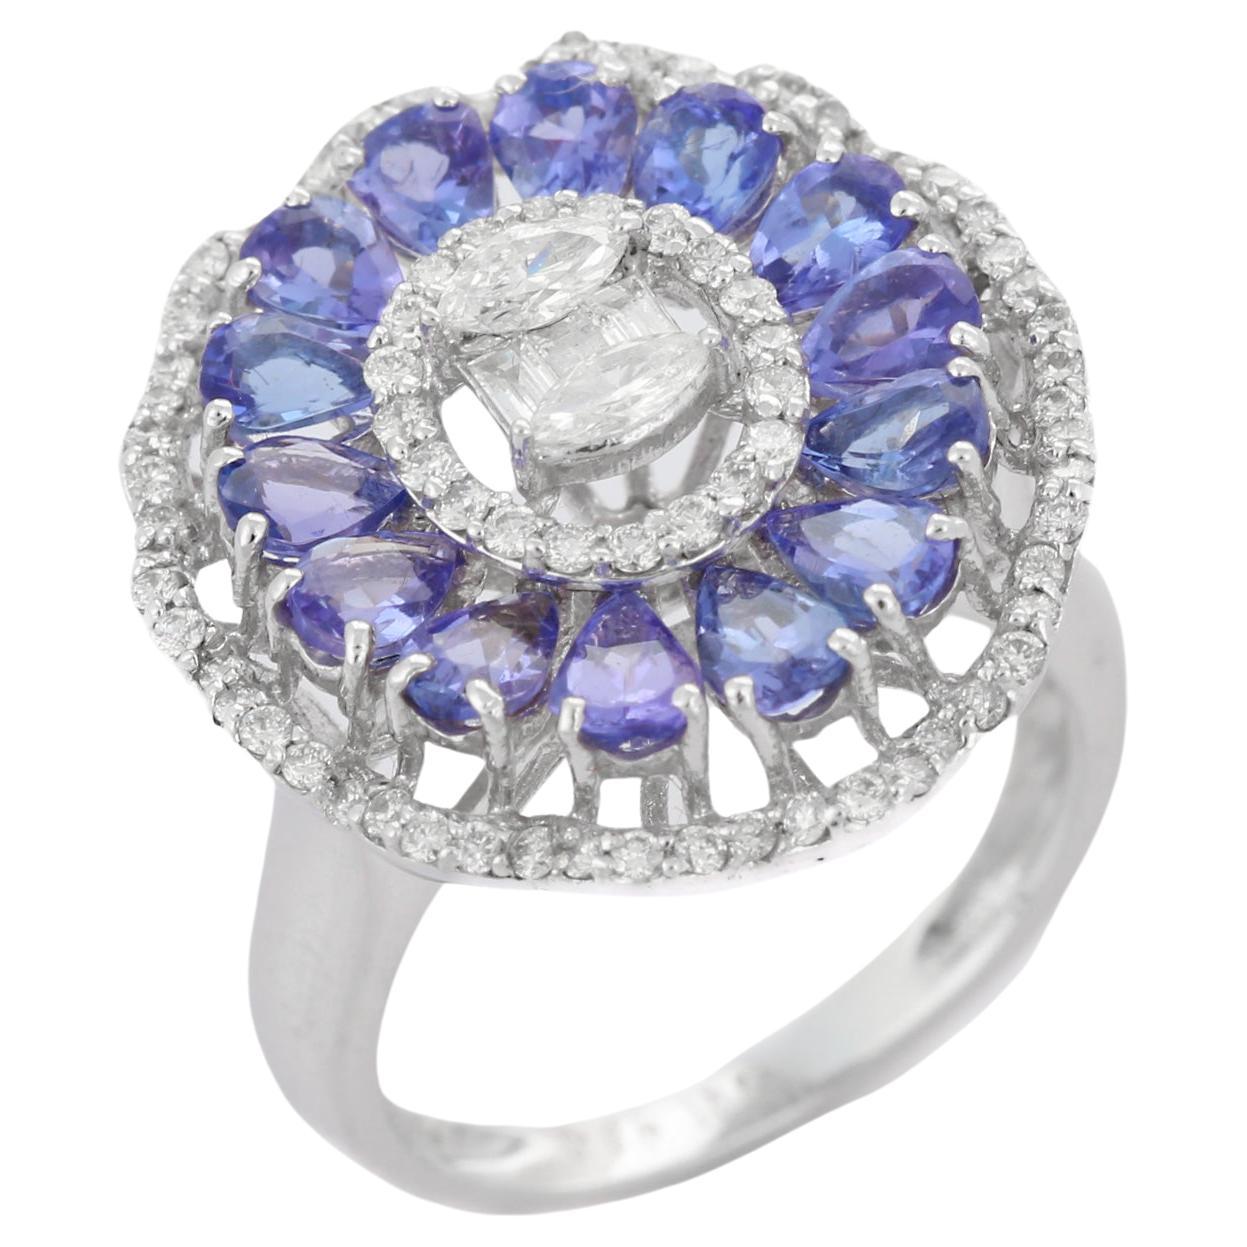 18K White Gold 2.26 ct Blue Sapphire Floral Cocktail Wedding Ring with Diamonds